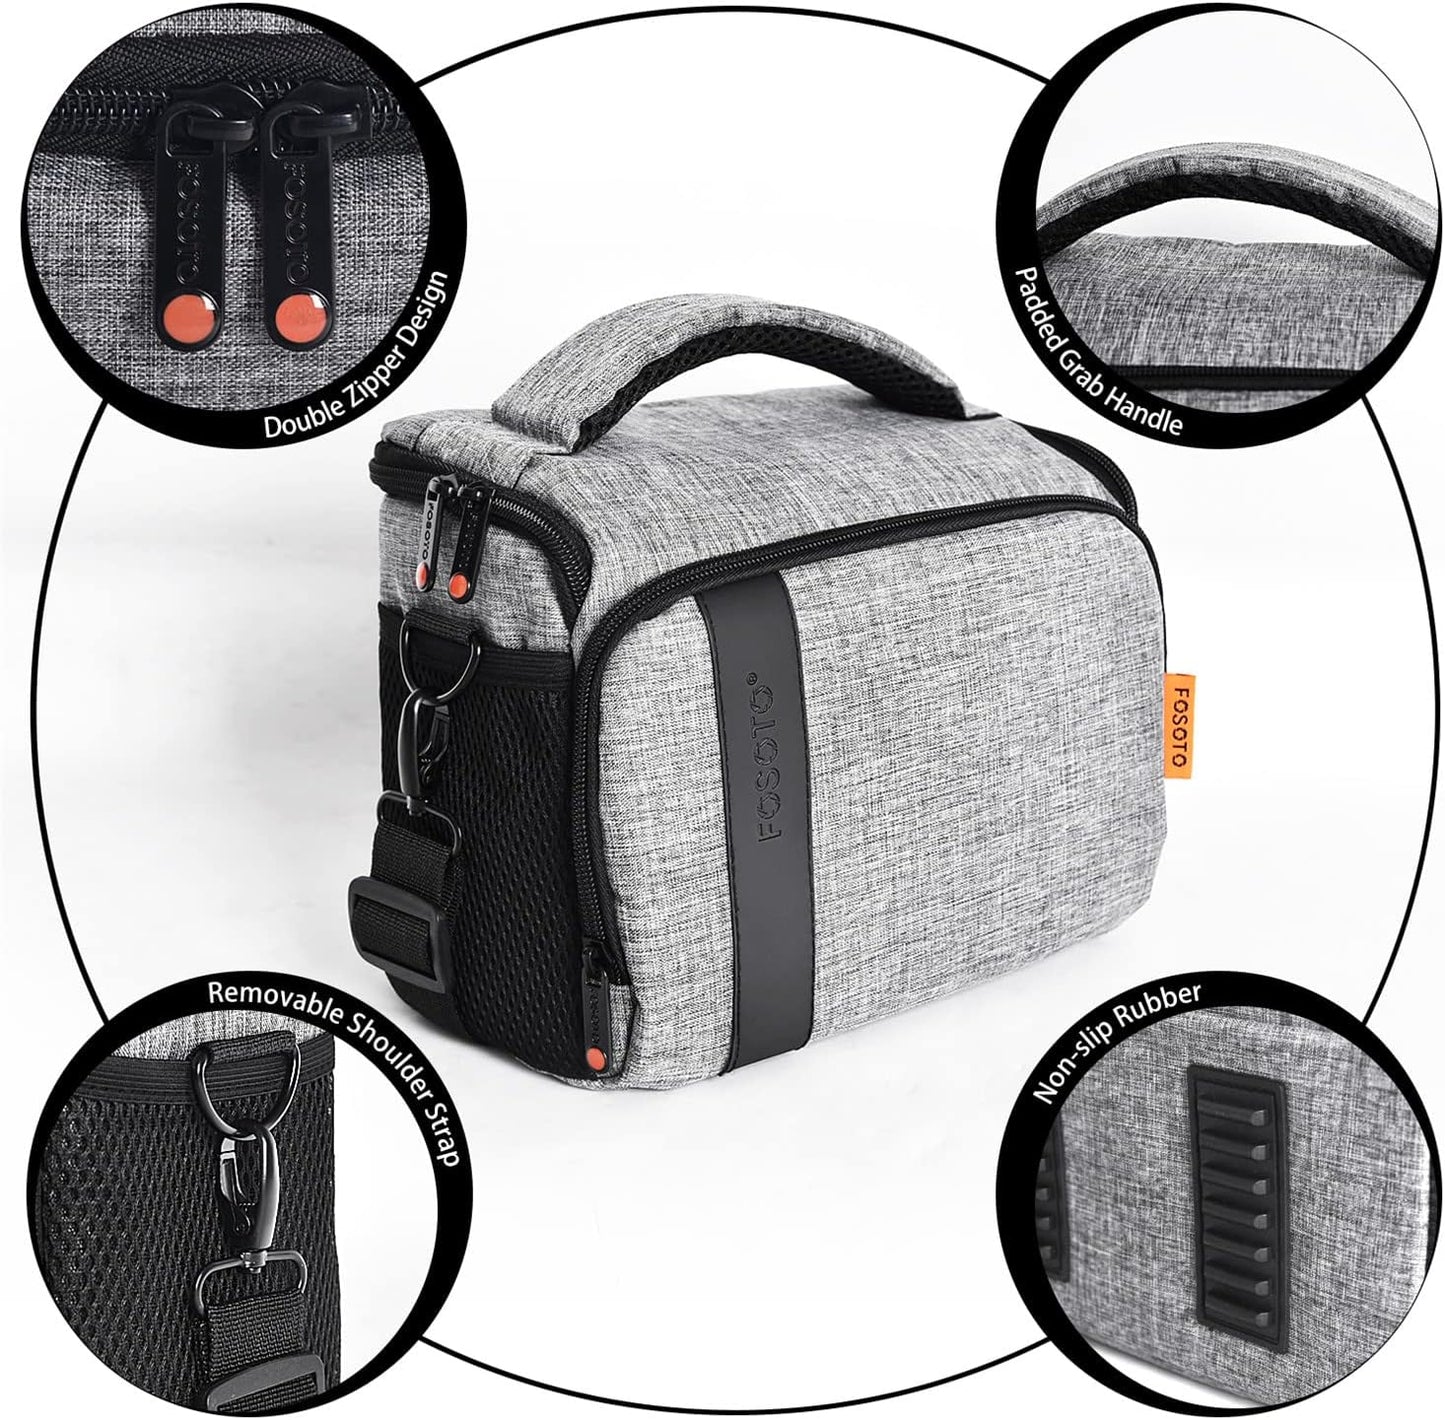 FOSOTO Waterproof DSLR Camera Bag Case,Shockproof Large Camera Lenses bags Compatible for Canon Rebel T7 2000D 4000D 700D 850D,Nikon D3500 D5600 D7500,Sony Photography Cases with Insert and Rain Cover